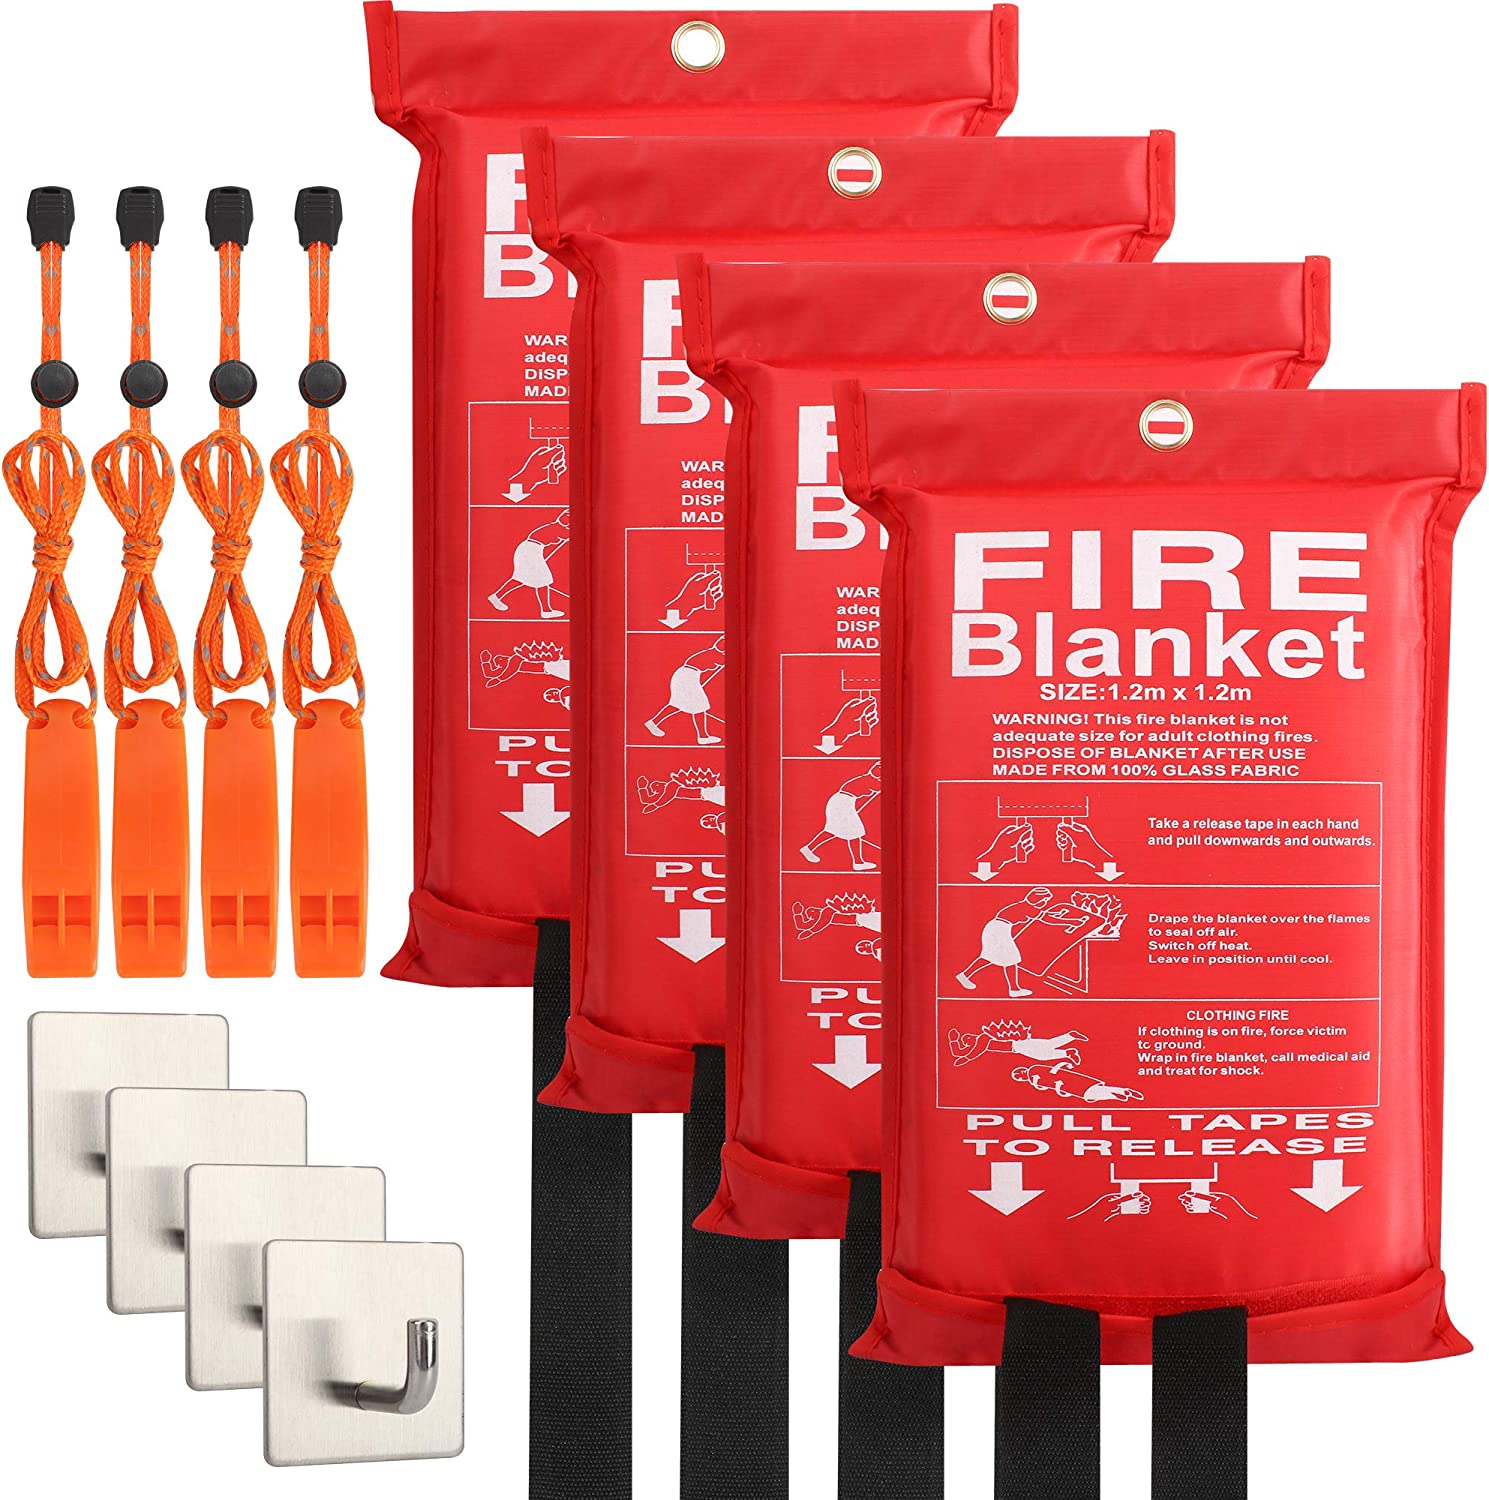 4-Pack Fire Blanket – XX-Large Fiberglass Fire Blanket Fire Suppression Blanket – Fire Blankets Emergency for People – Fire Safety Blanket with Emergency Whistles – Fireblanket for Kitchen, Home